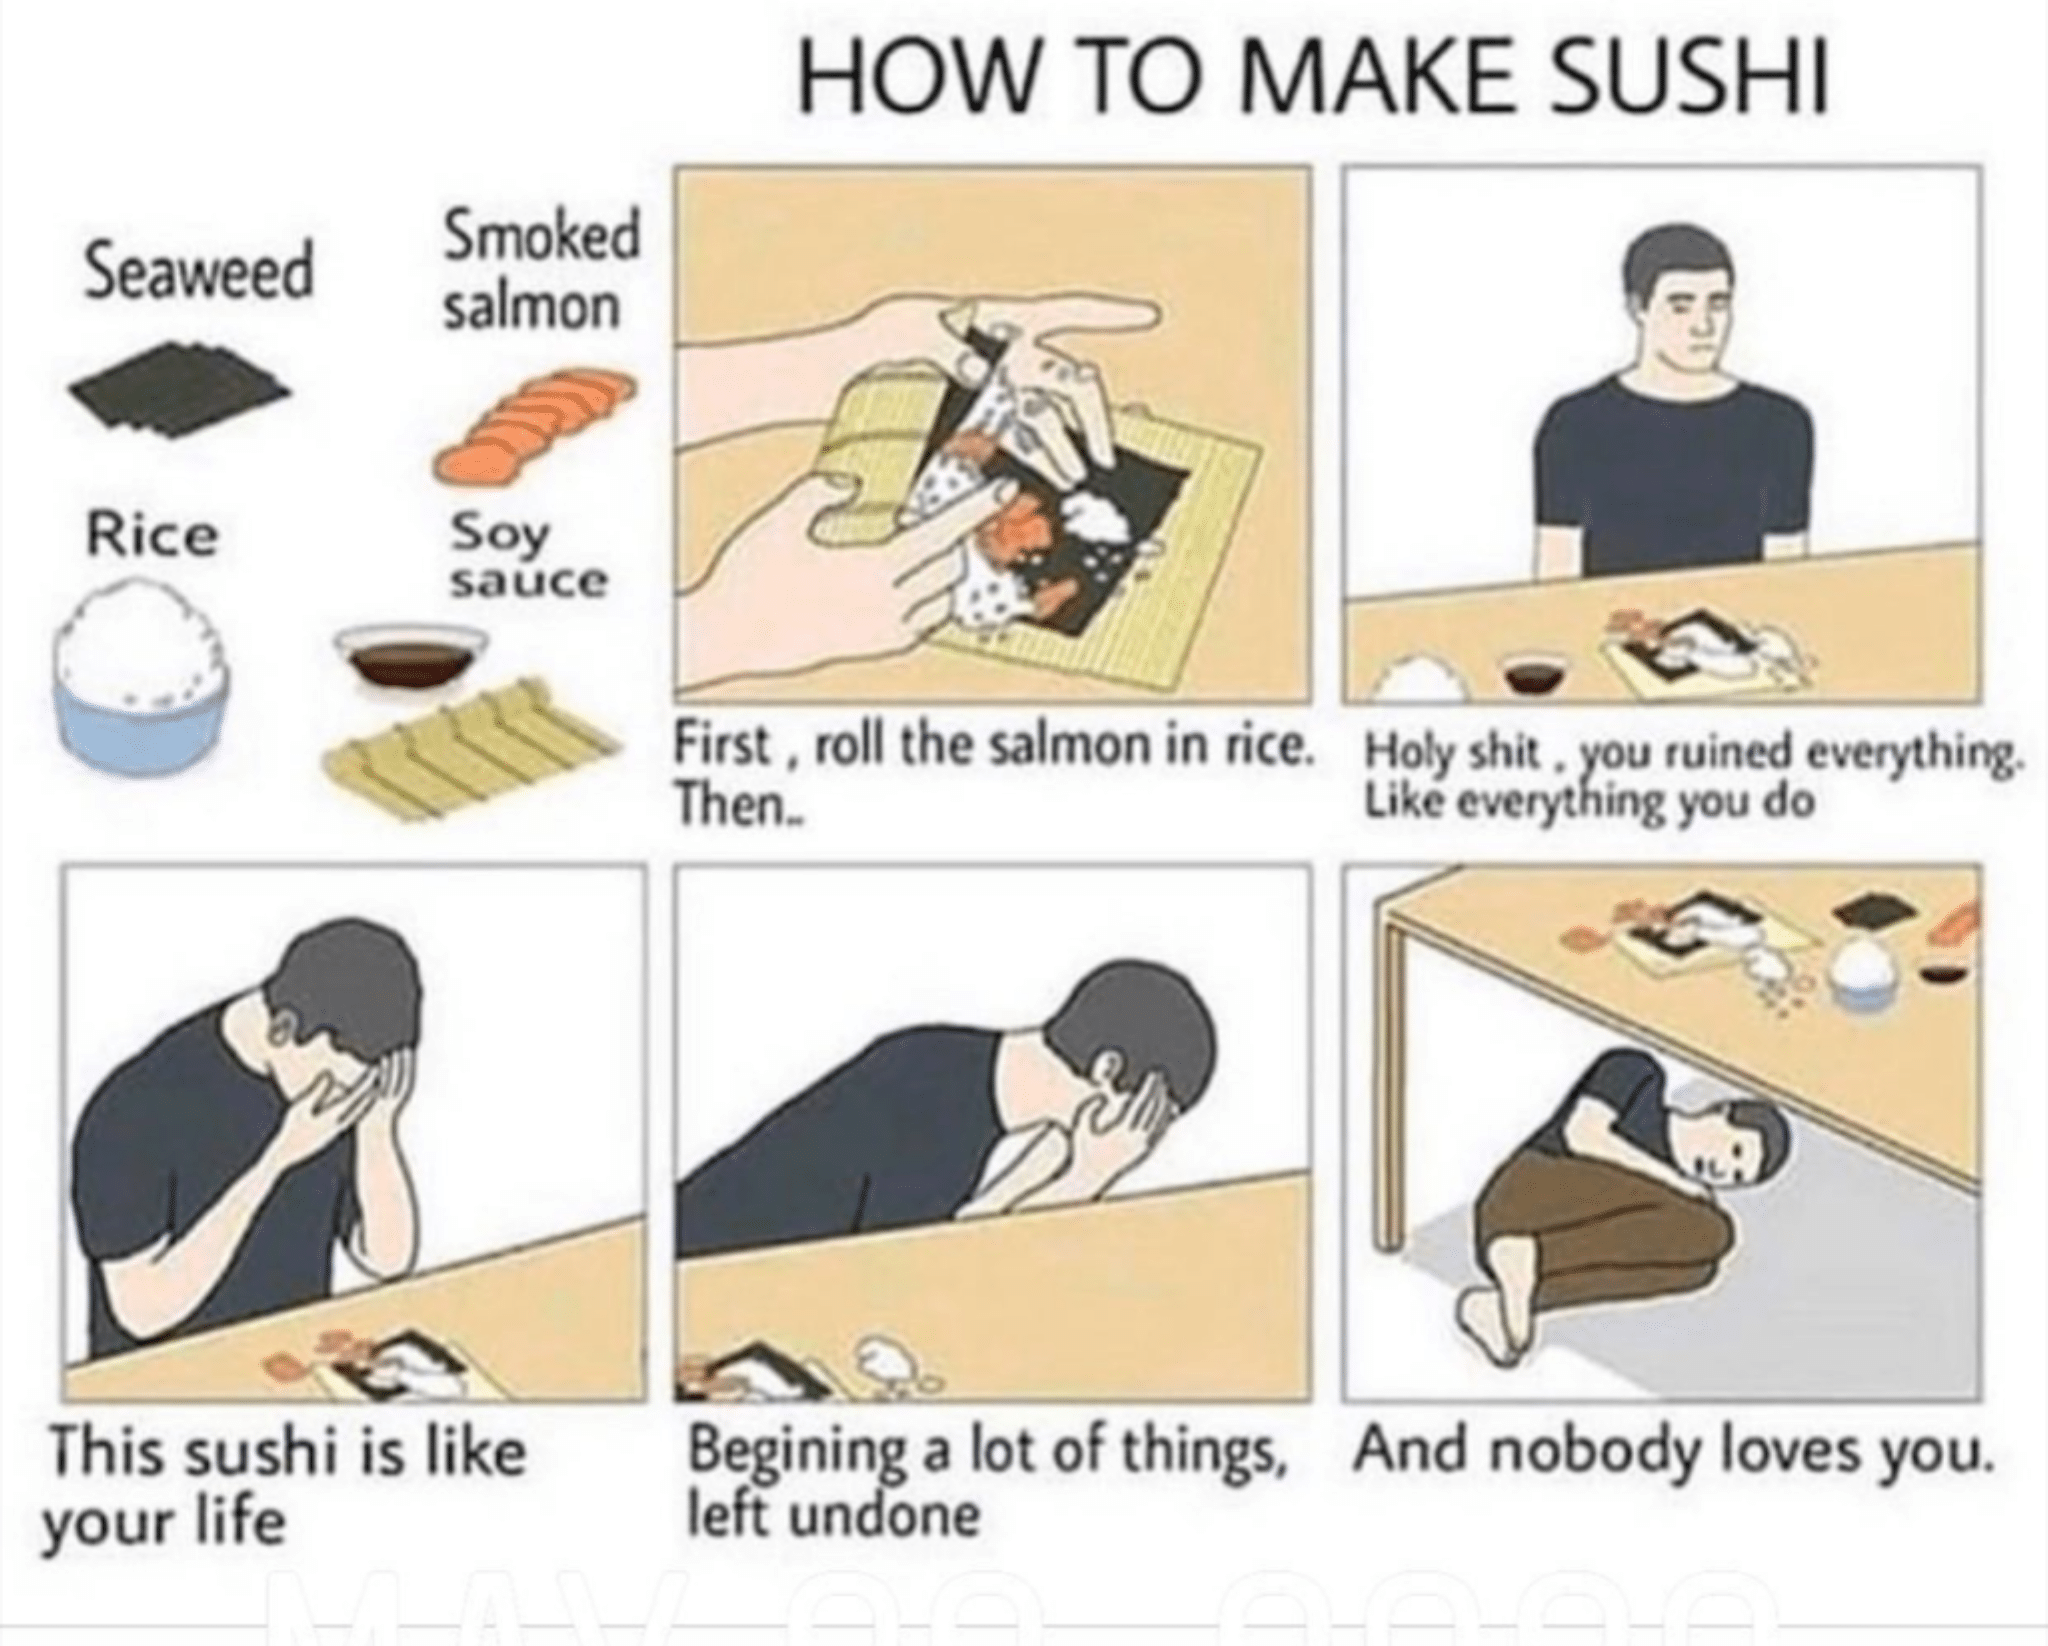 Depression,  depression memes Depression,  text: HOW TO MAKE SUSHI Smoked Seaweed Rice salmon Soy sauce First . roll the salmon in rice. Then- Begining a lot of things, left undone Hoty shit . Like eve u ruined everything. ing you do This sushi is like your life And nobody loves you. 